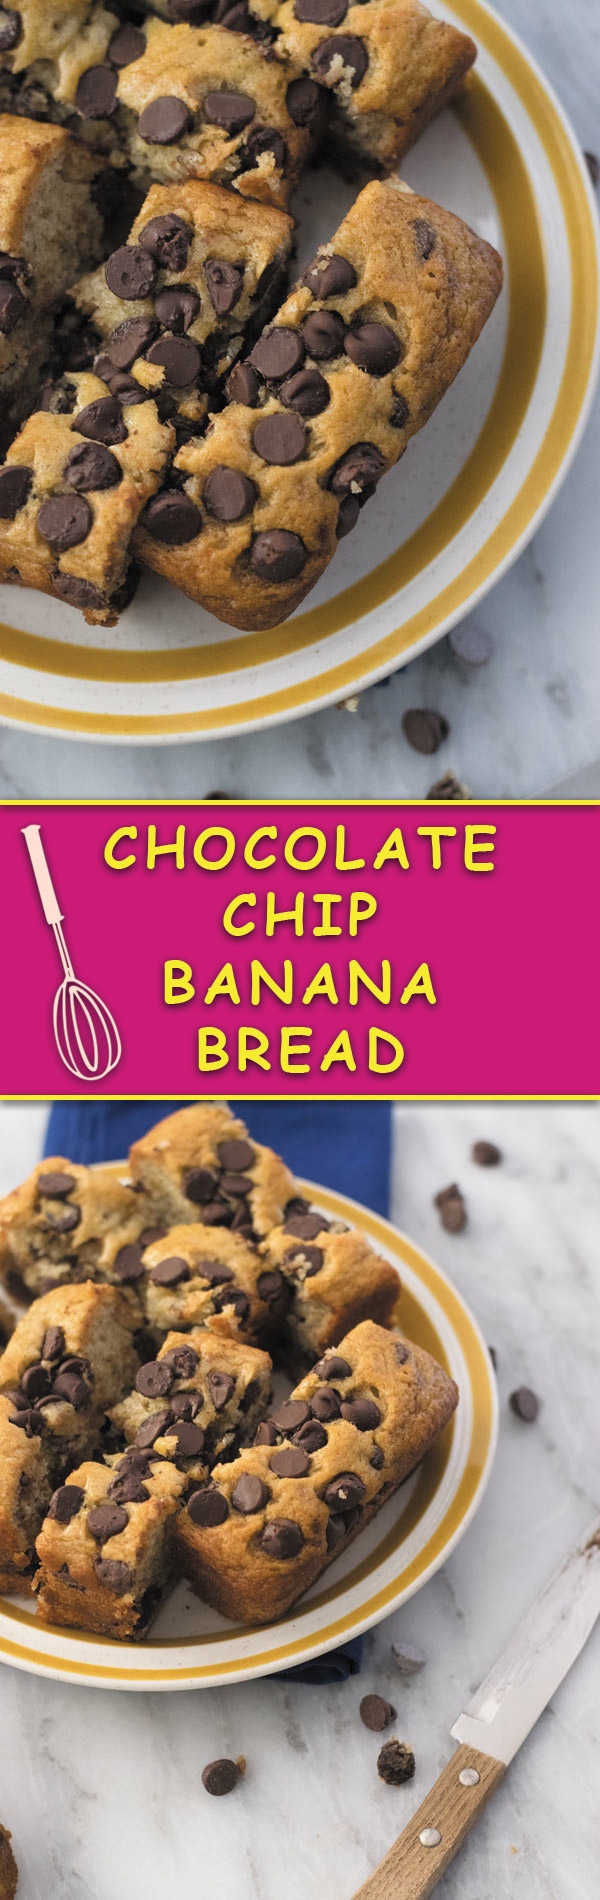 Chocolate Chip Banana Bread - delicious VEGAN chocolate chip banana bread made with simple ingredients, so soft & a perfect healthy treat anytime of the day!